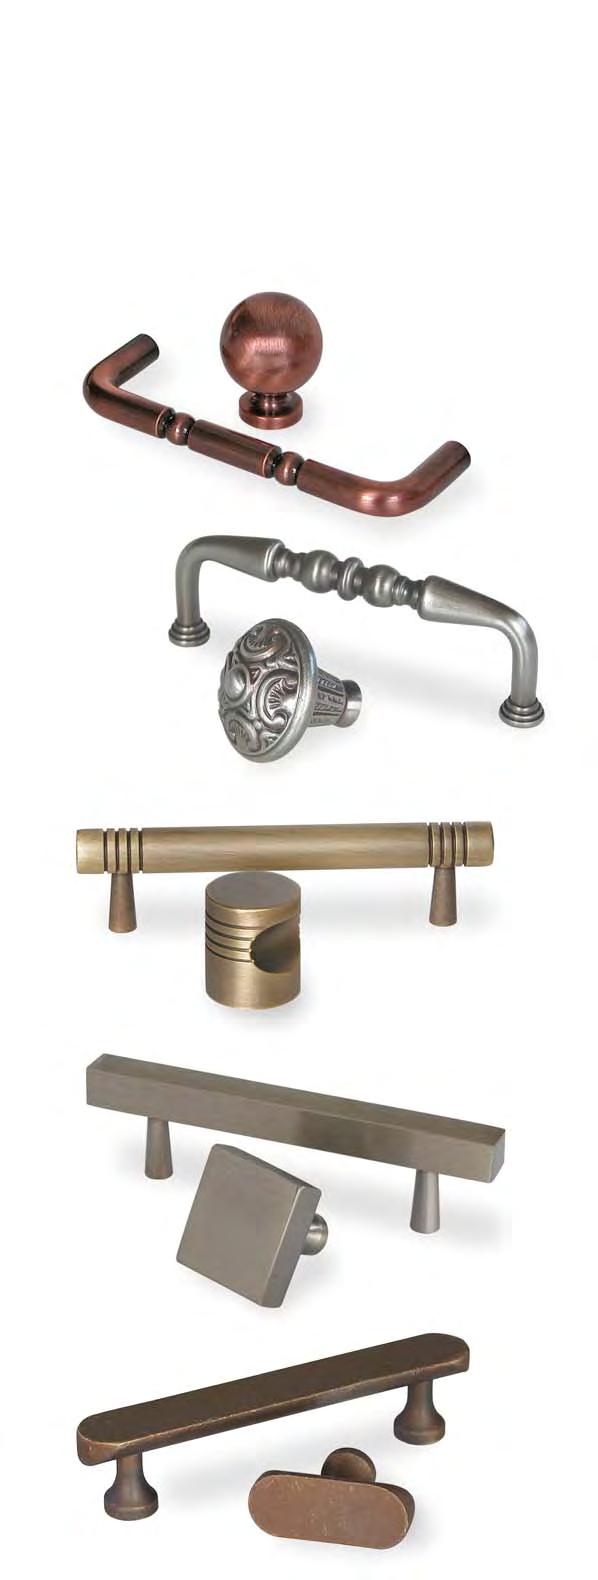 cabinet hardware Arlington COLLECTION Classic and elegant styling, made from solid brass and available in all our beautiful finishes two of a kind Here are just a few of our knobs and pulls that pair